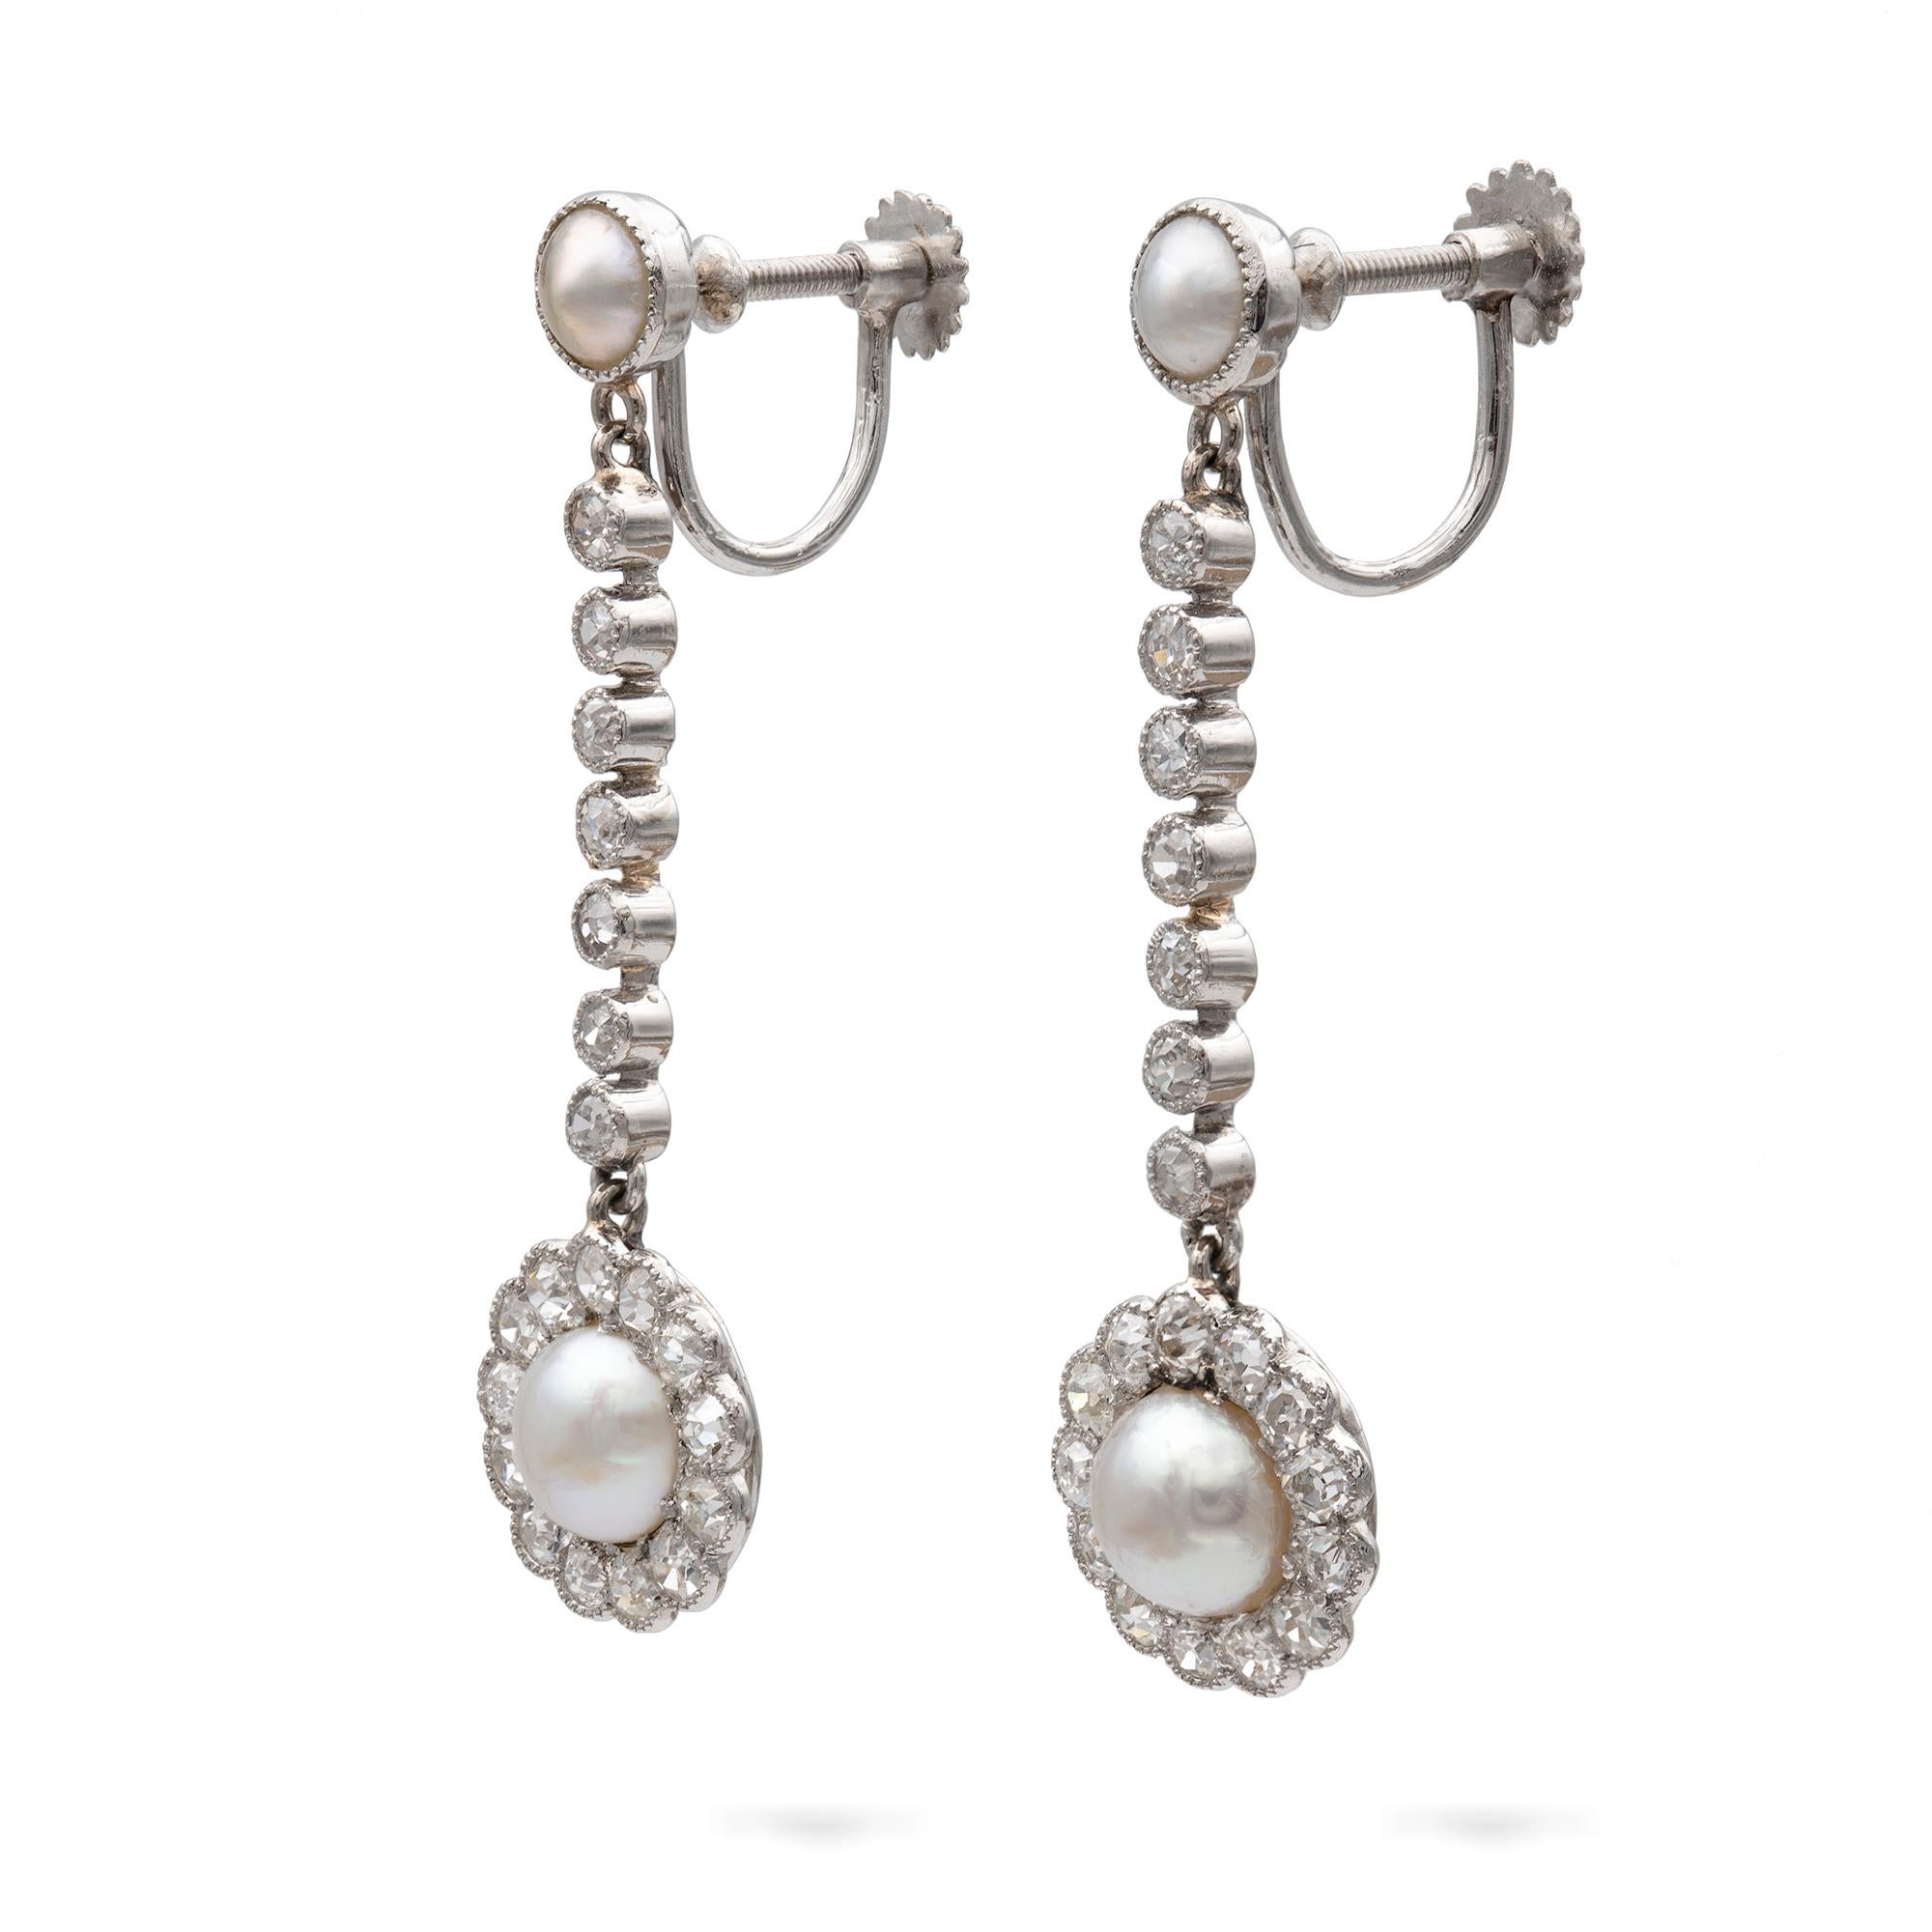 A pair of Edwardian natural pearl and diamond drop earrings, each consisting of a natural pearl surrounded by thirteen old brilliant-cut diamonds, suspended from a line of seven rose-cut diamonds in a rub-over setting, suspended by a single natural